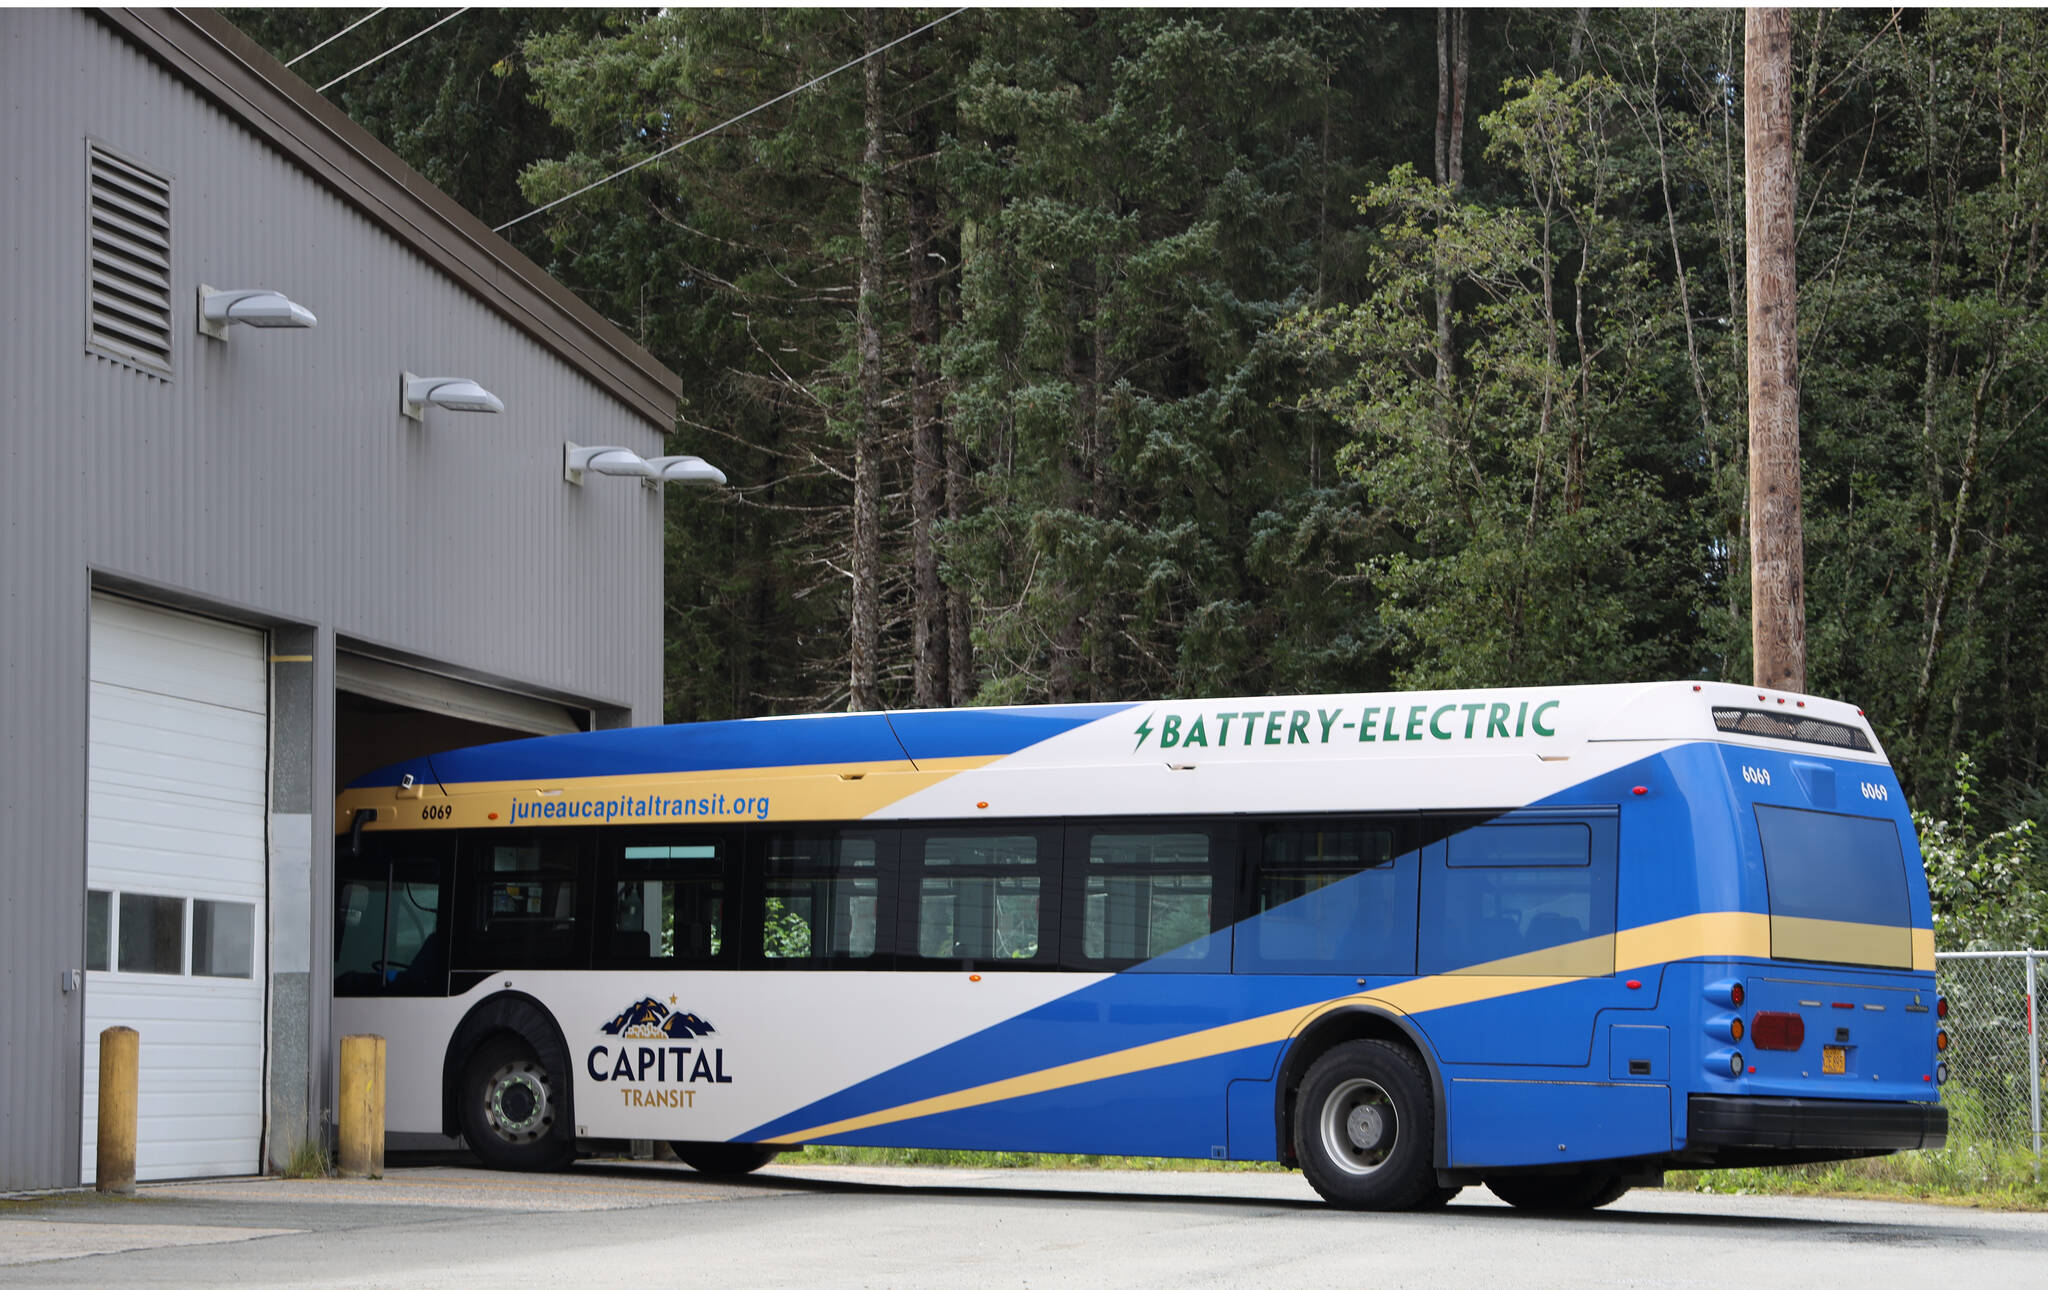 Clarise Larson / Juneau Empire 
The only electric bus enters the City Borough of Juneau Capital Transit’s bus barn on Tuesday afternoon. Capital Transit is preparing for the addition of seven electric buses which are slated to hit Juneau’s roads sometime in 2024.